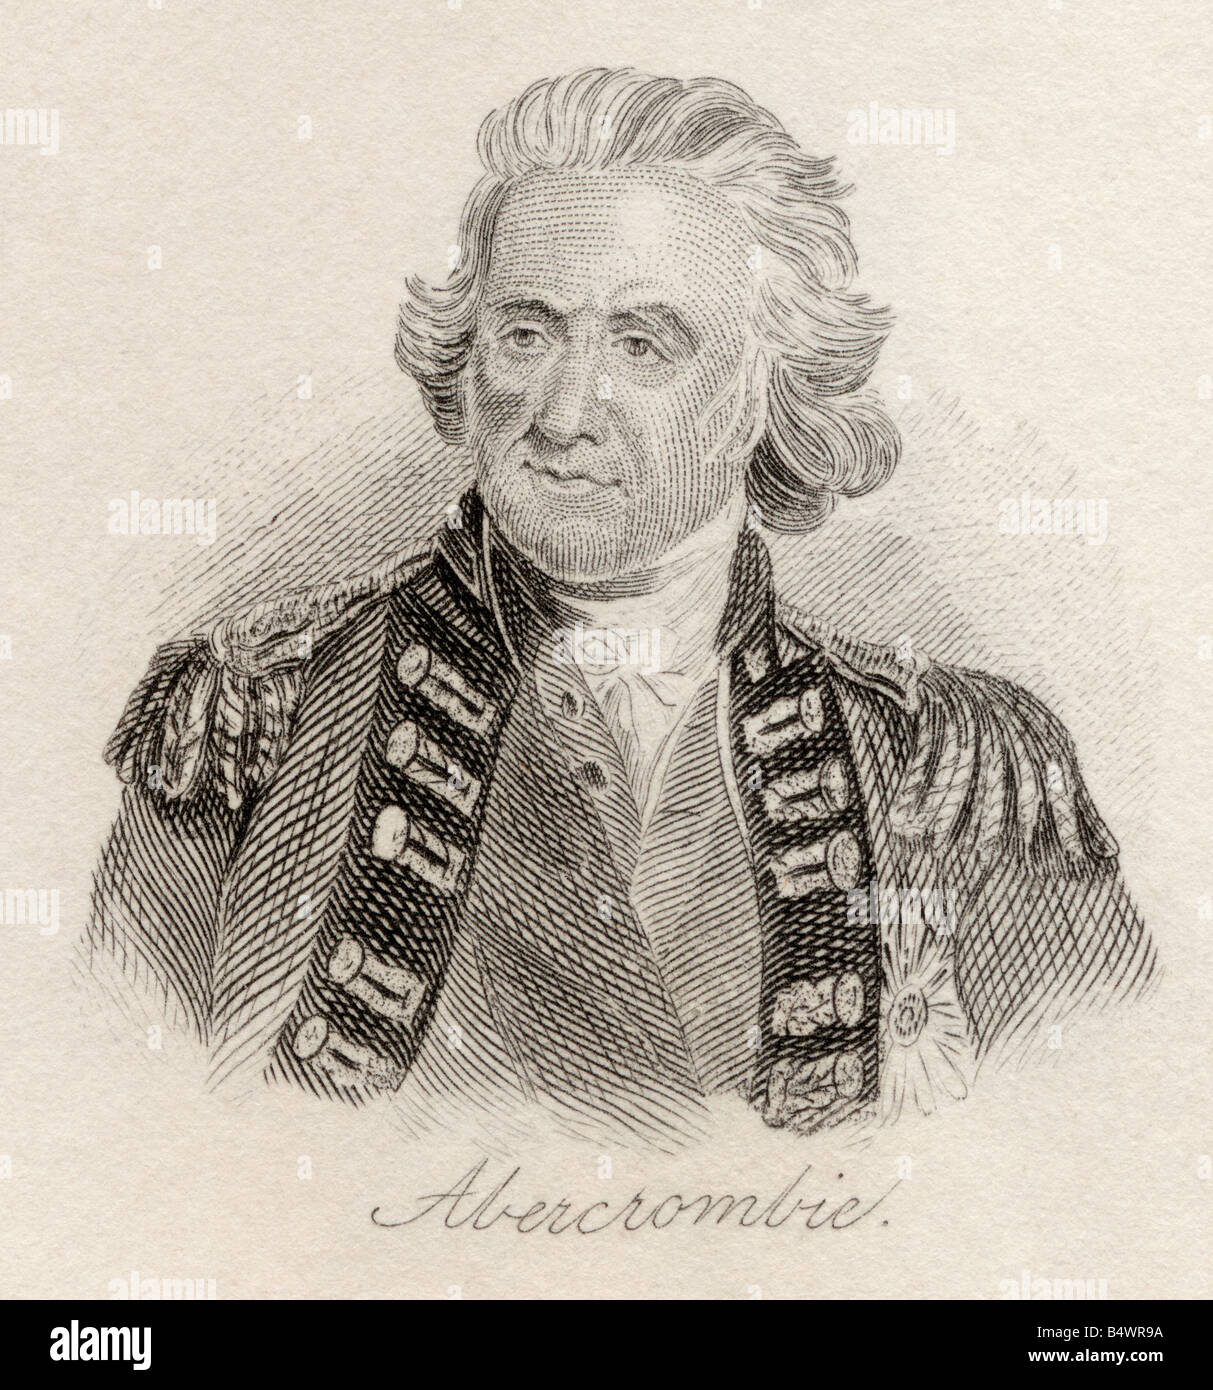 Sir Ralph Abercromby, 1734 - 1801. British General. From the book Crabbs Historical Dictionary, published 1825. Stock Photo